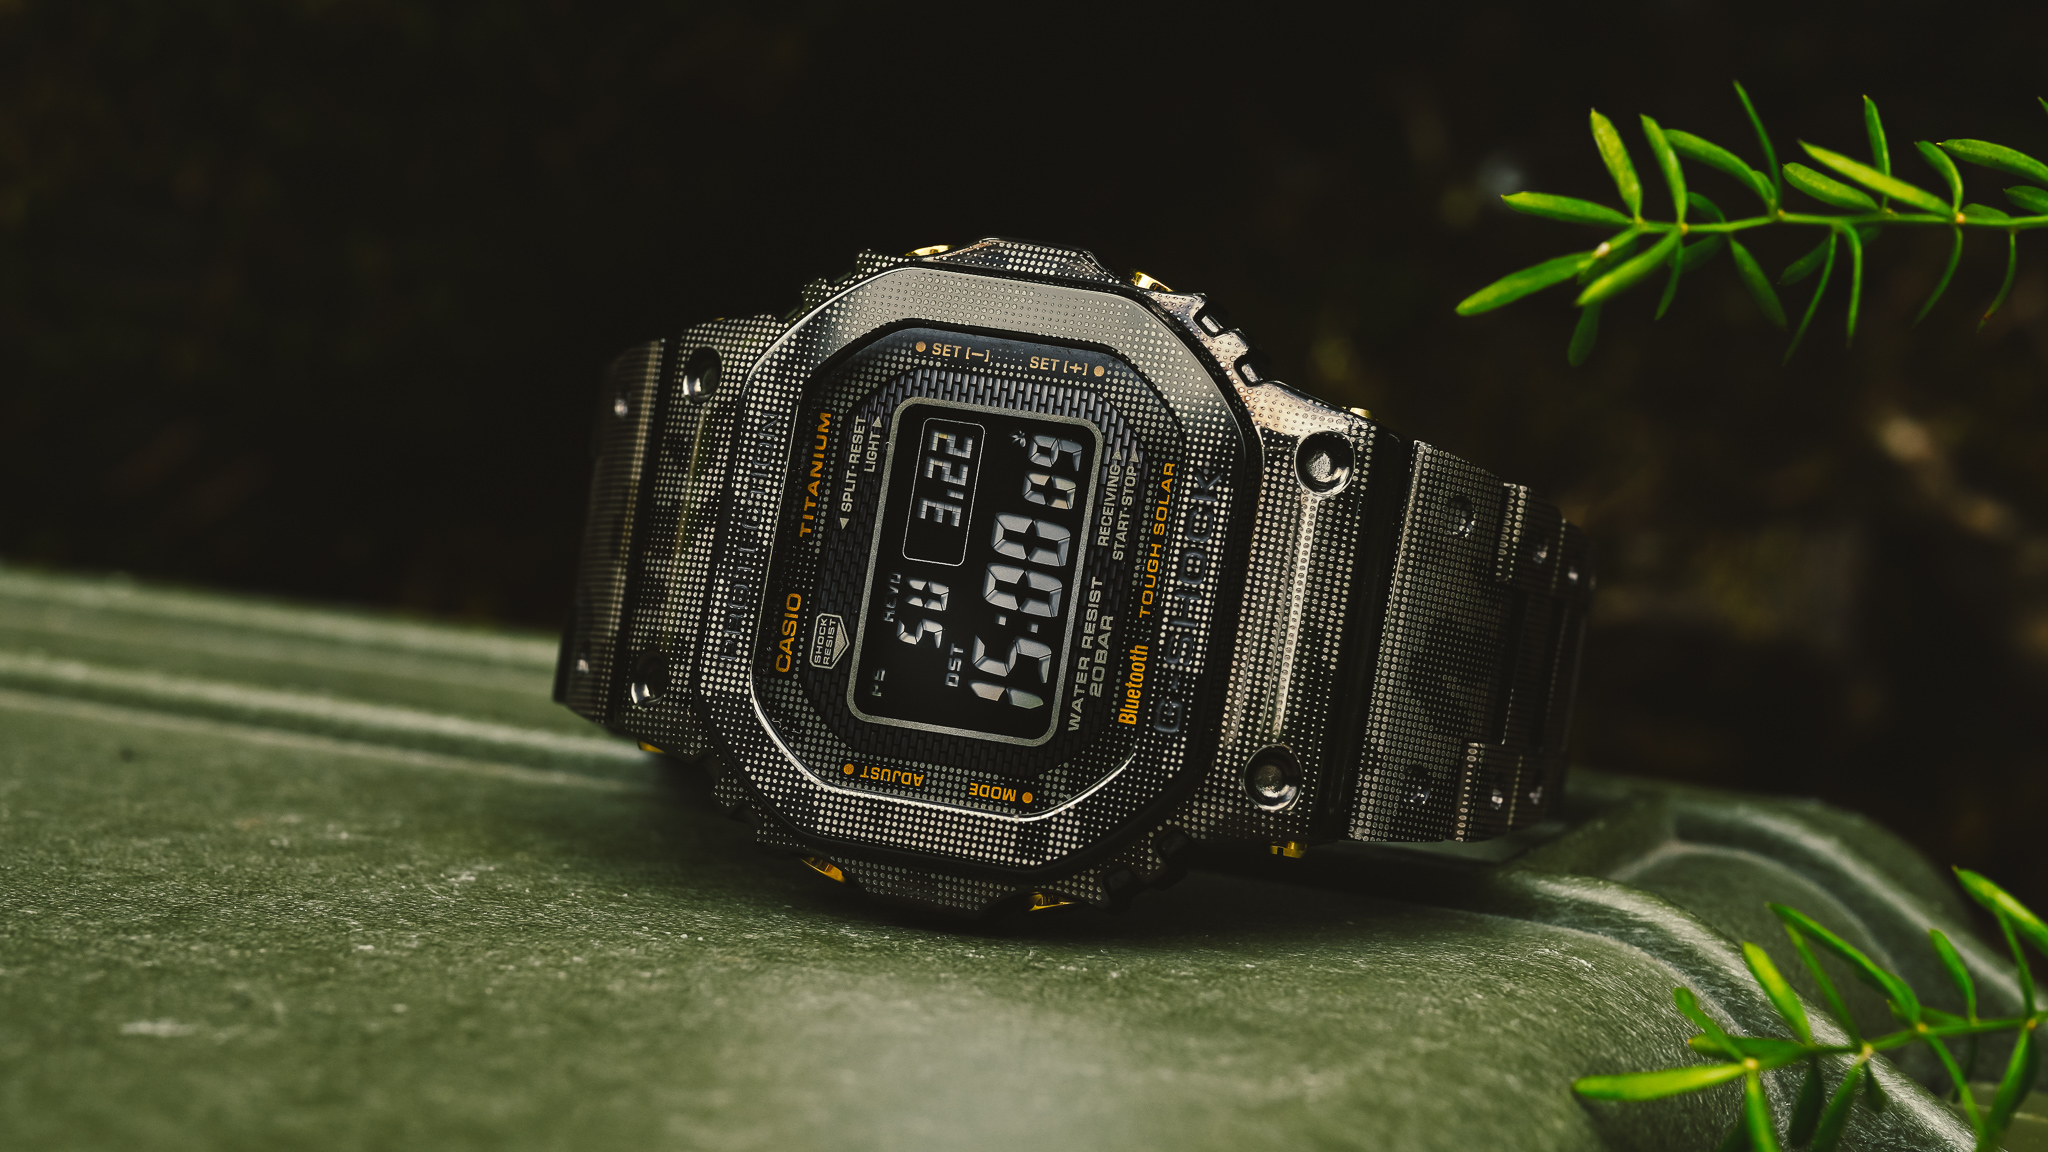 How Not To Be Seen: A Primer On Camouflage With The Casio G-Shock GMW-B5000CM